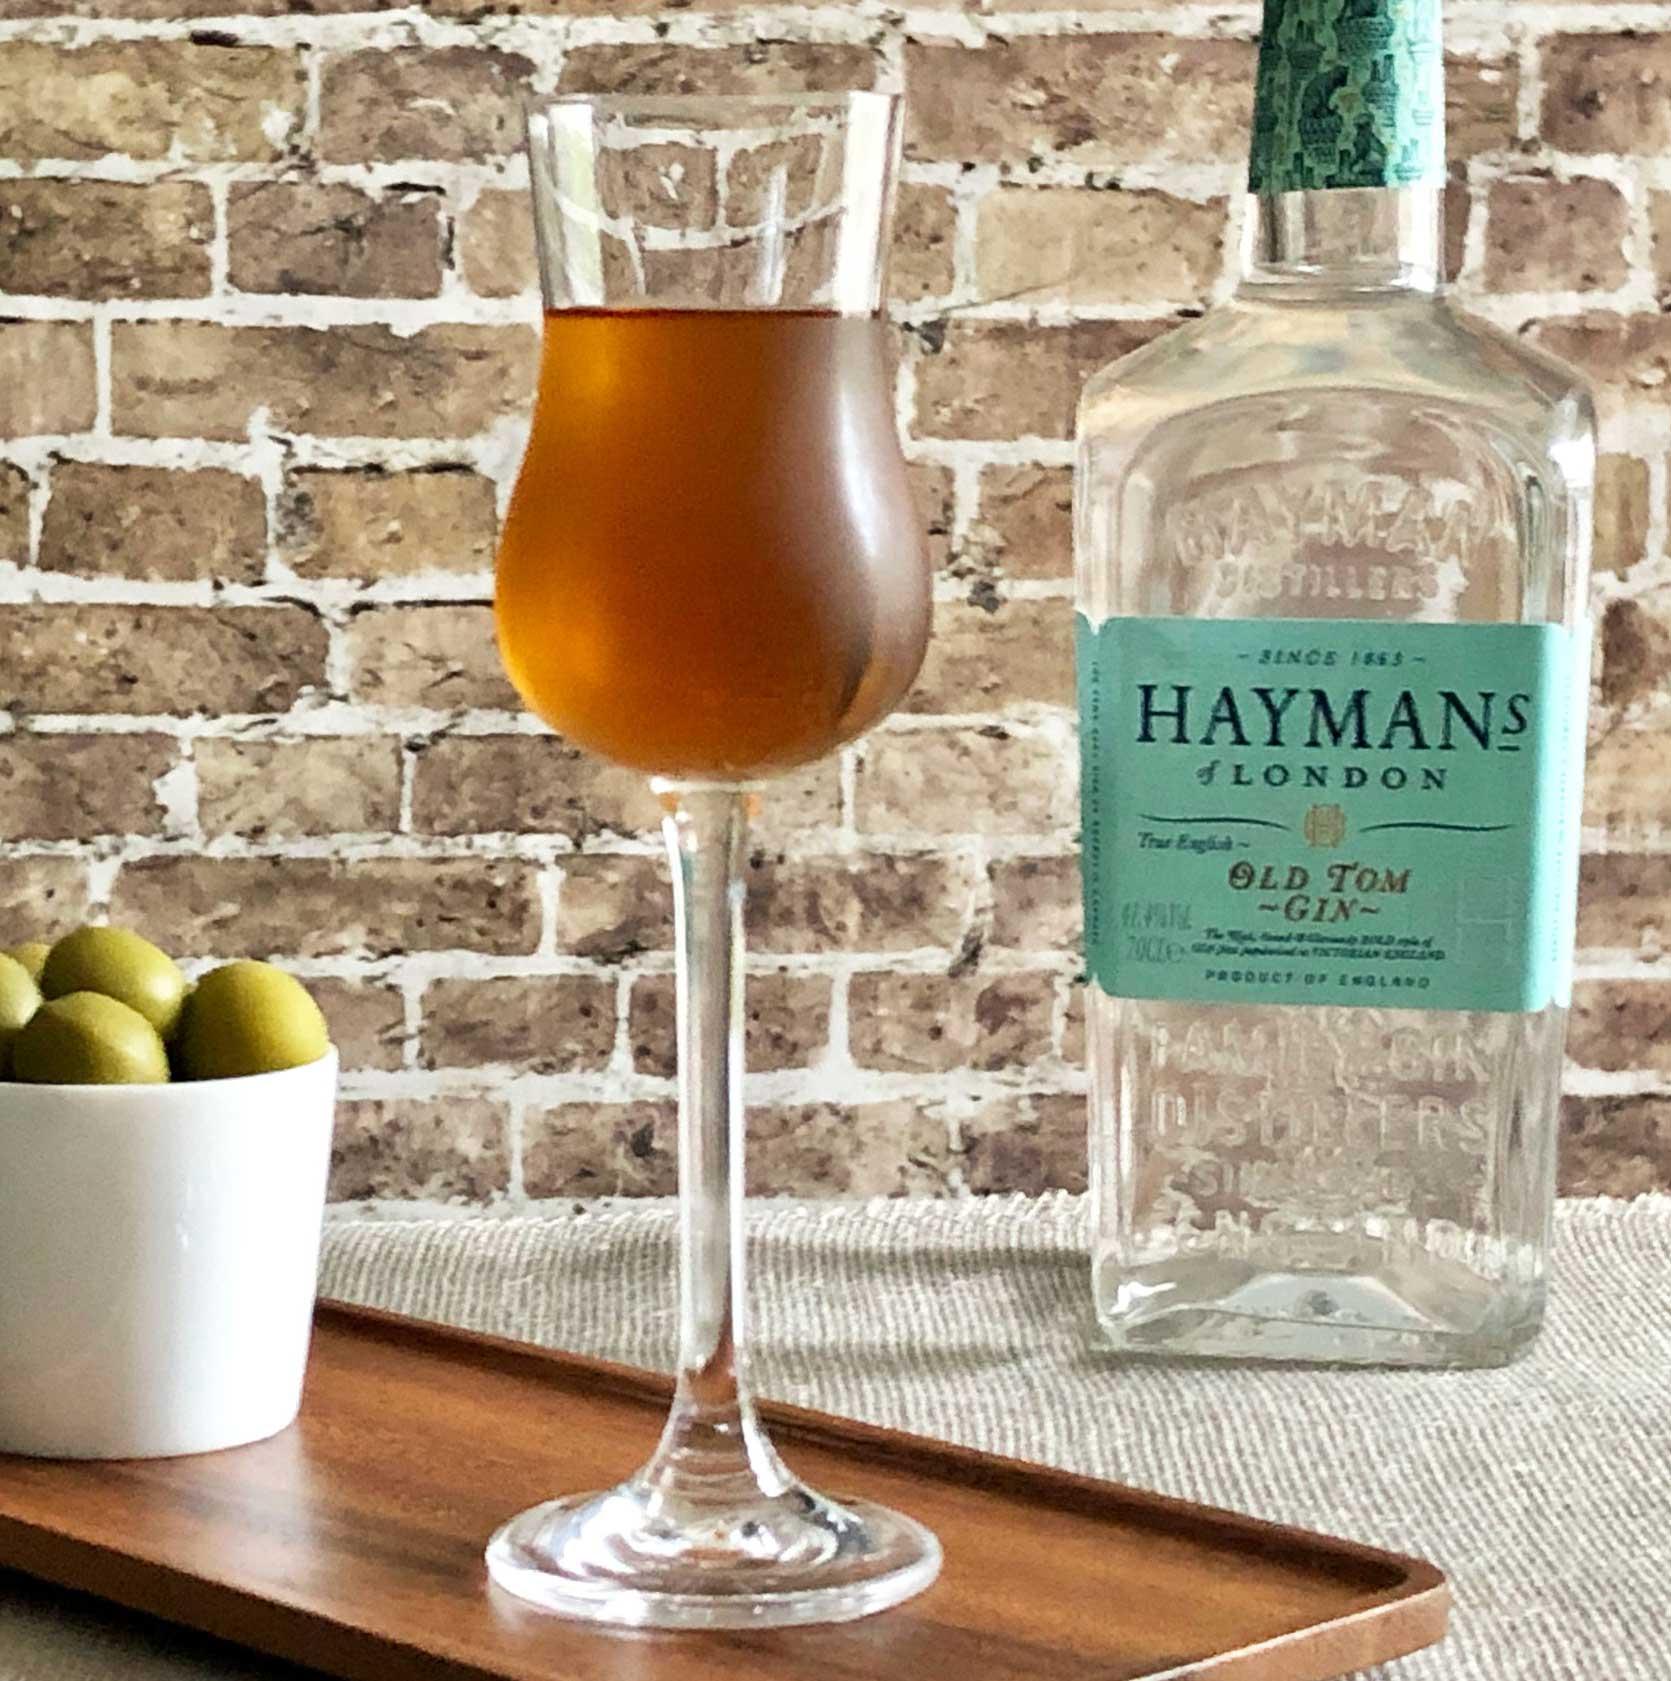 An example of the The Spring Cocktail, the mixed drink (drink), adapted from the Savoy Cocktail Book by Erik Ellestad, featuring Hayman’s Old Tom Gin, Bonal Gentiane-Quina, Bénédictine, orange bitters, and olive; photo by Lee Edwards